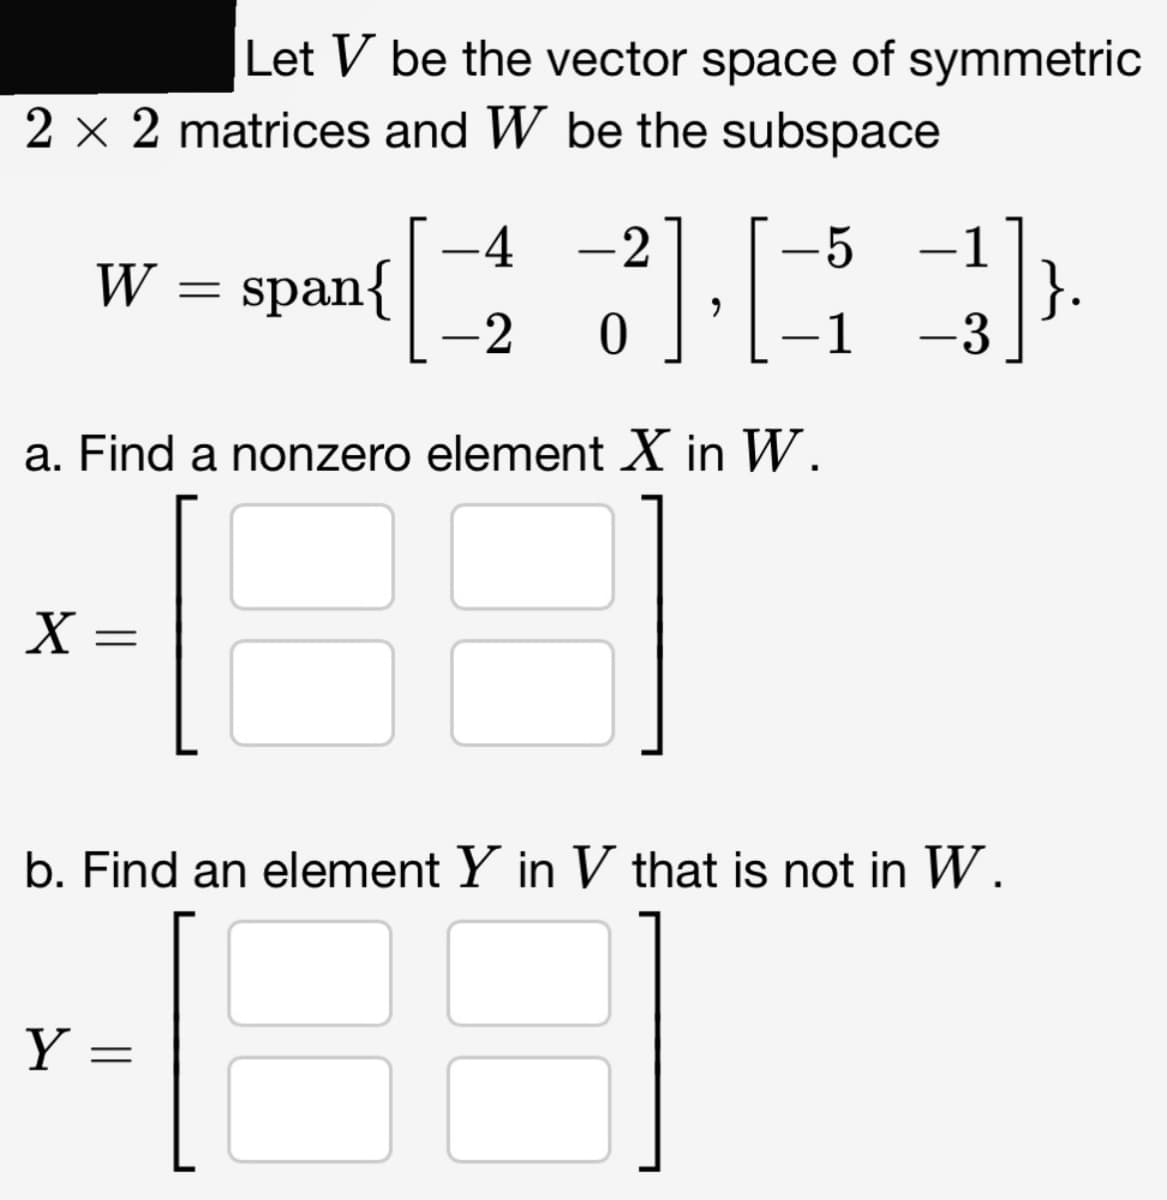 Let V be the vector space of symmetric
2 x 2 matrices and W be the subspace
W
X =
Y
=
a. Find a nonzero element X in W.
-4 -2
5
([1])
-2 0
-1 -3
=
span{
b. Find an element Y in V that is not in W.
E
}.